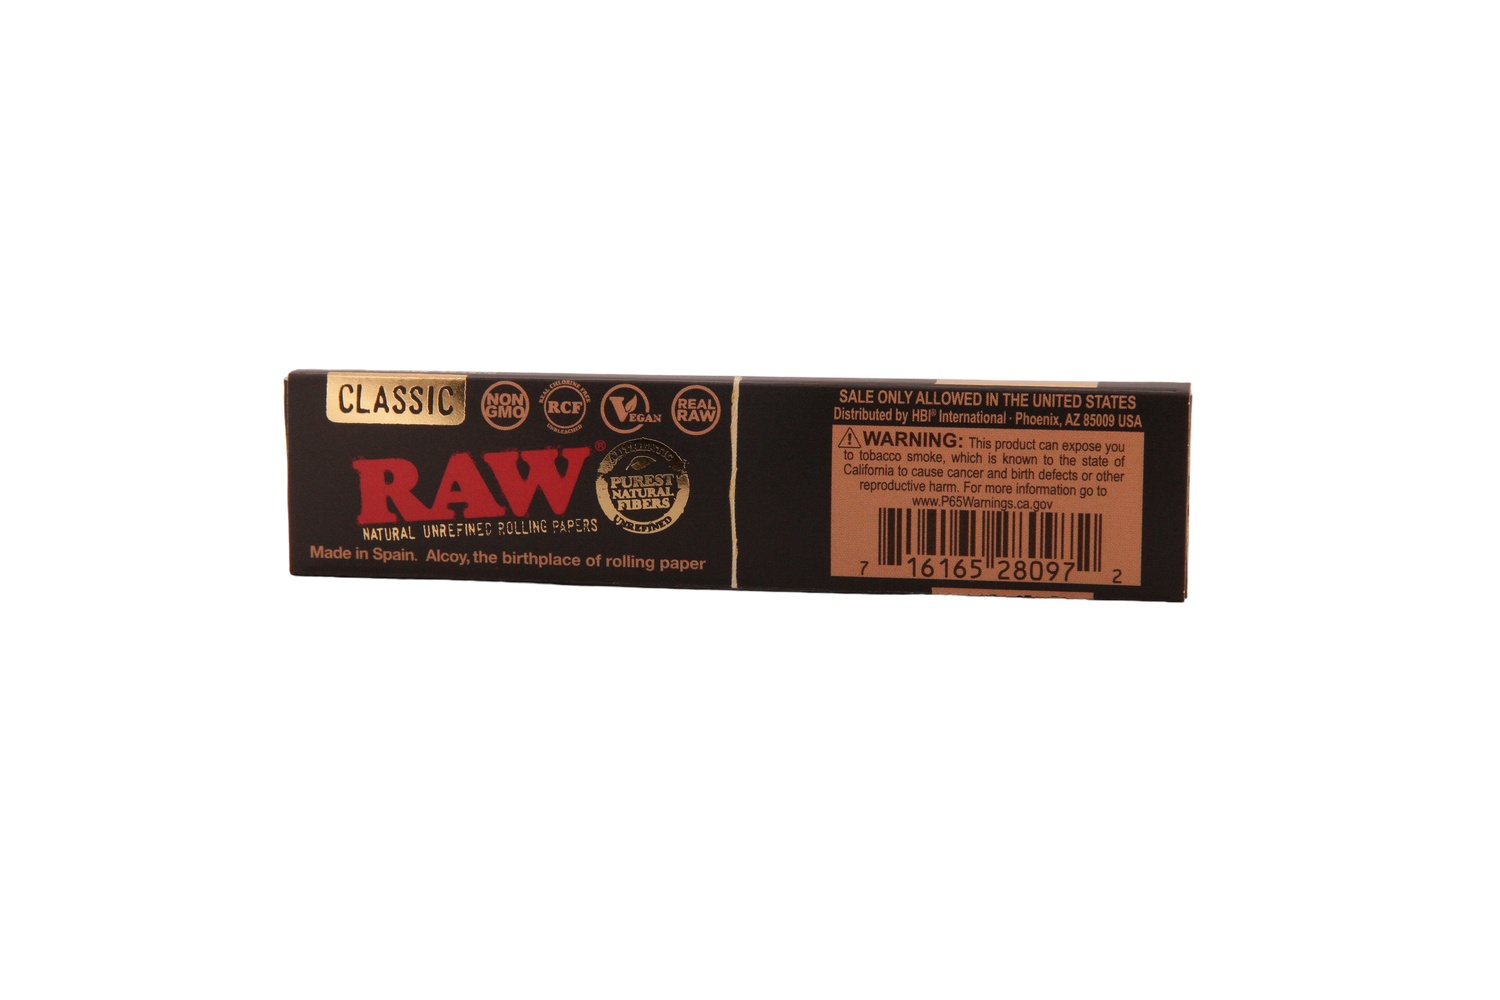 Raw Black Papers - King Size Slim